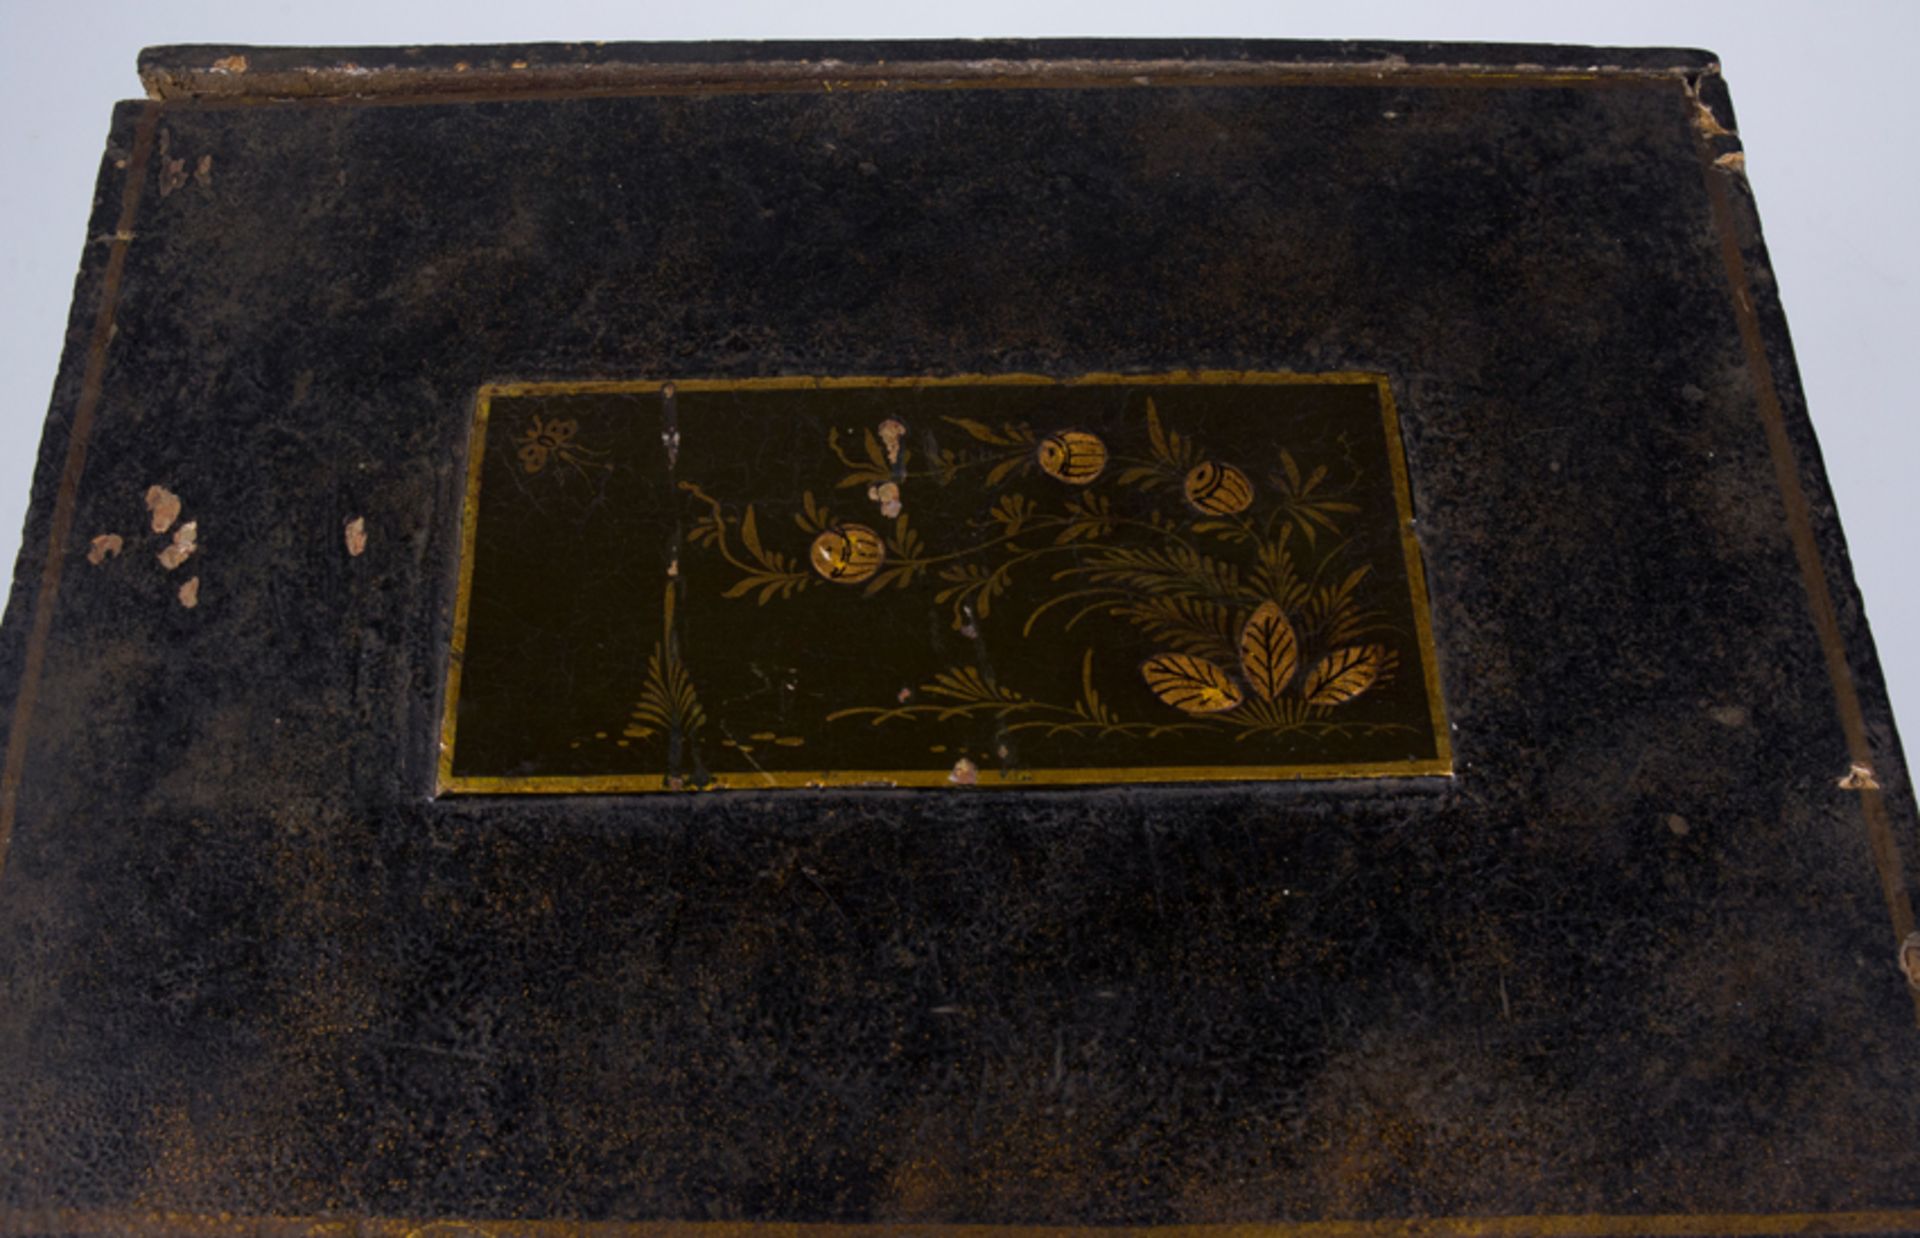 Gilded, lacquered wooden chest with engraved and gilded ivory interior. Indo-Portuguese. 18th centur - Image 8 of 10